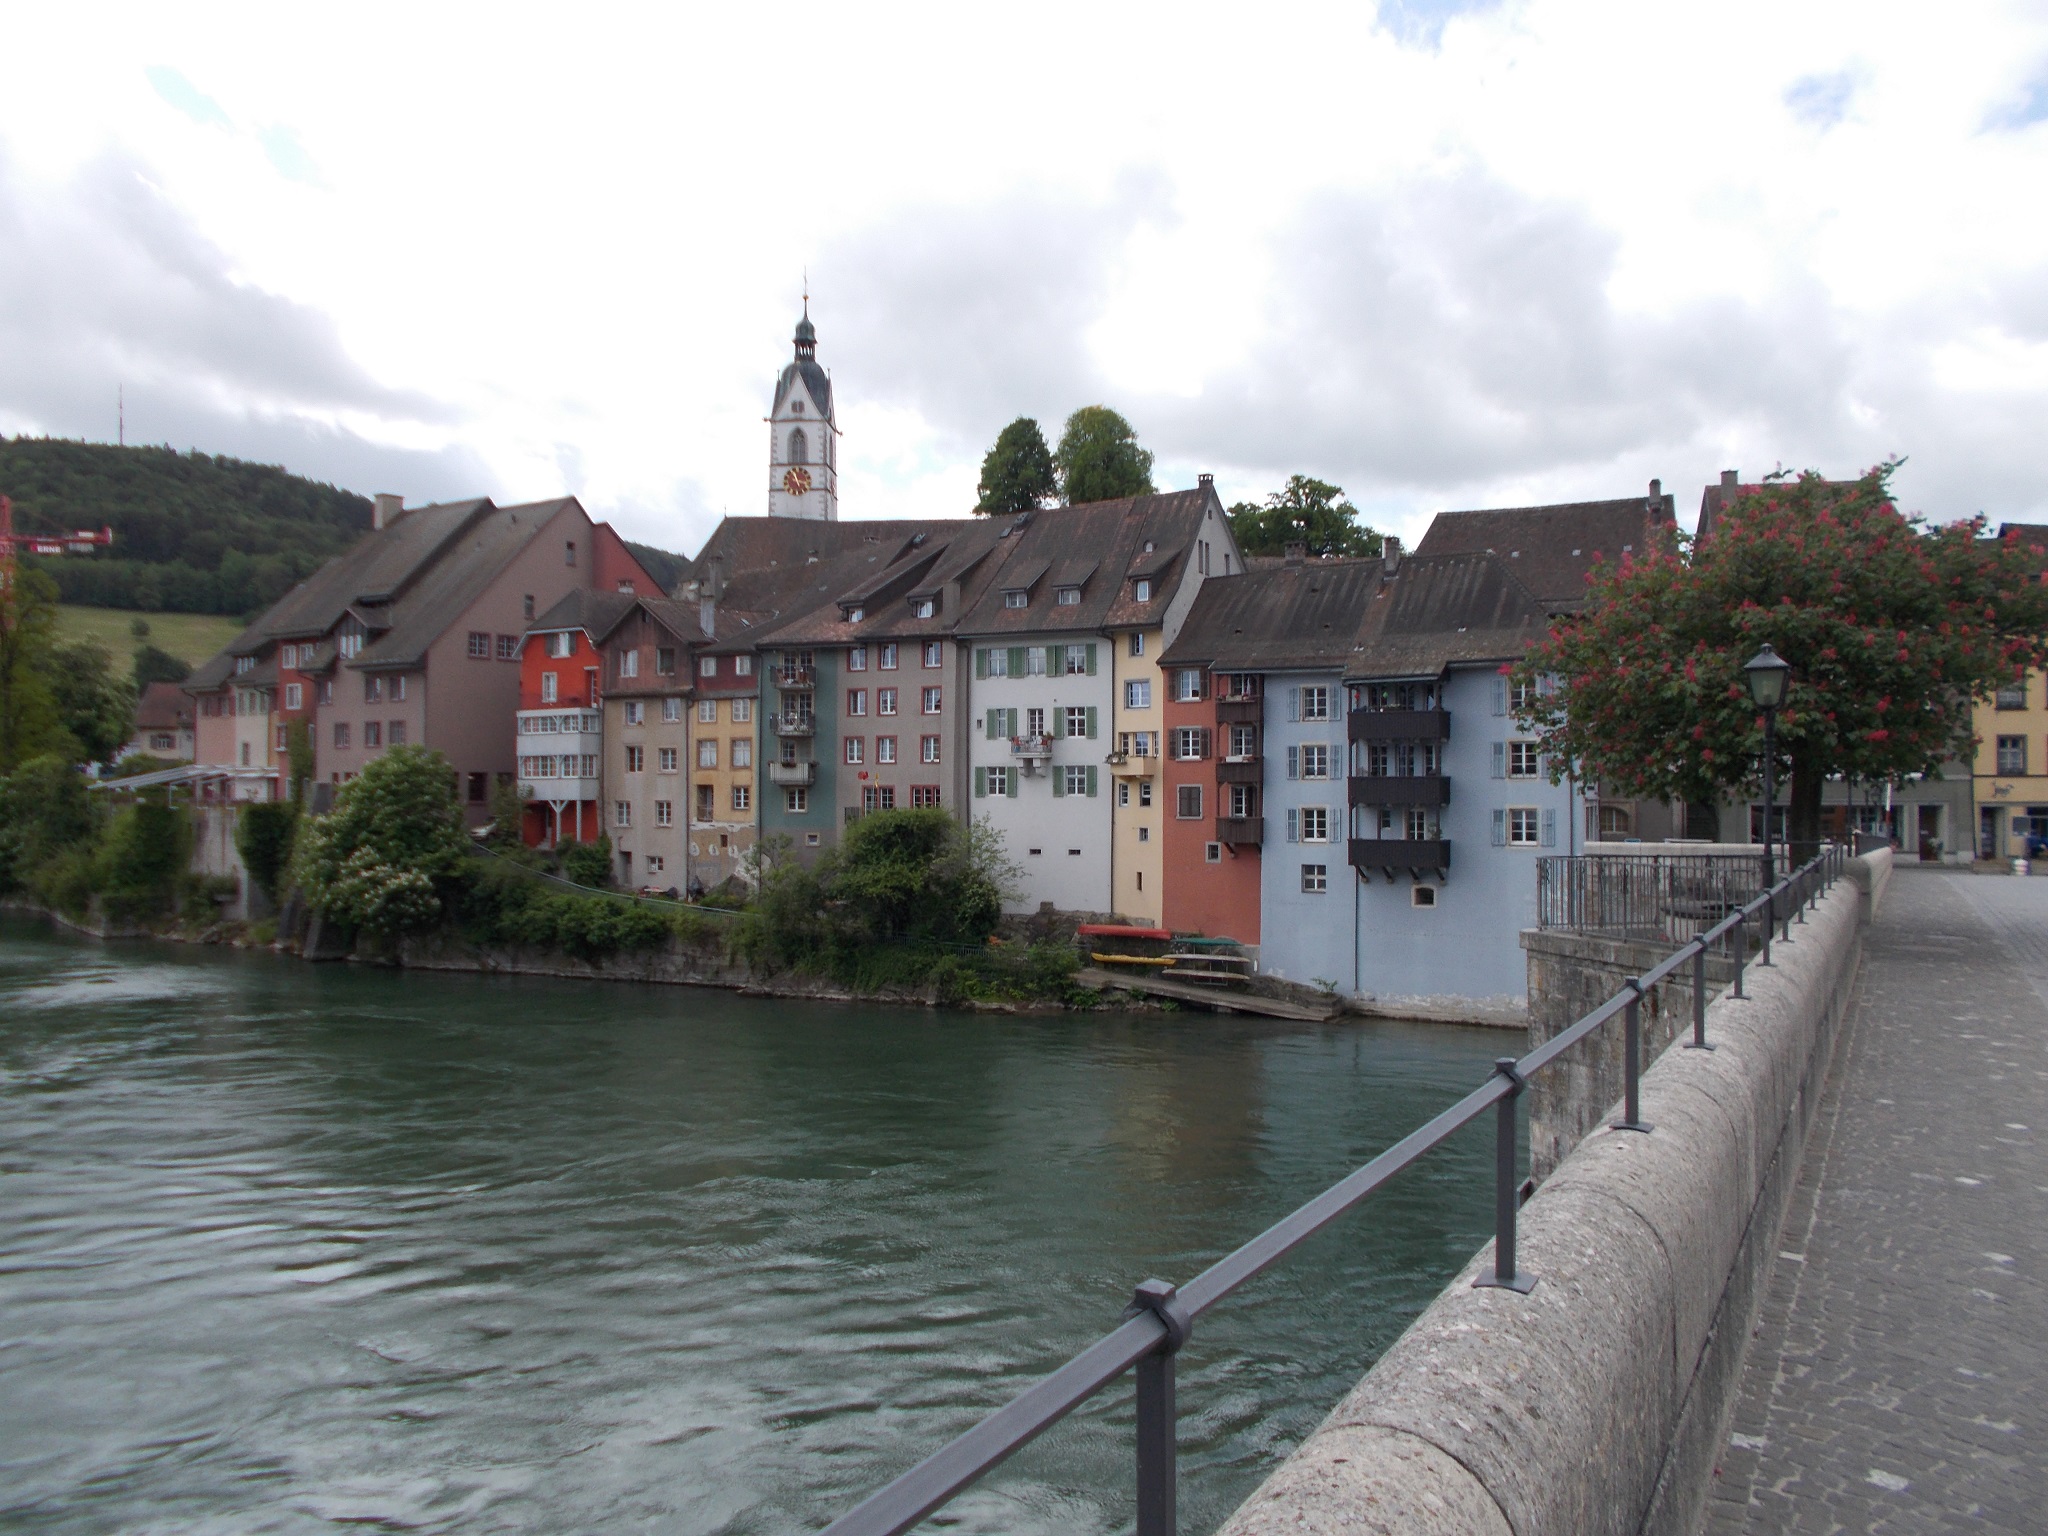 A row of colourful buildings at the edge of the Rhine river photographed from a bridge.